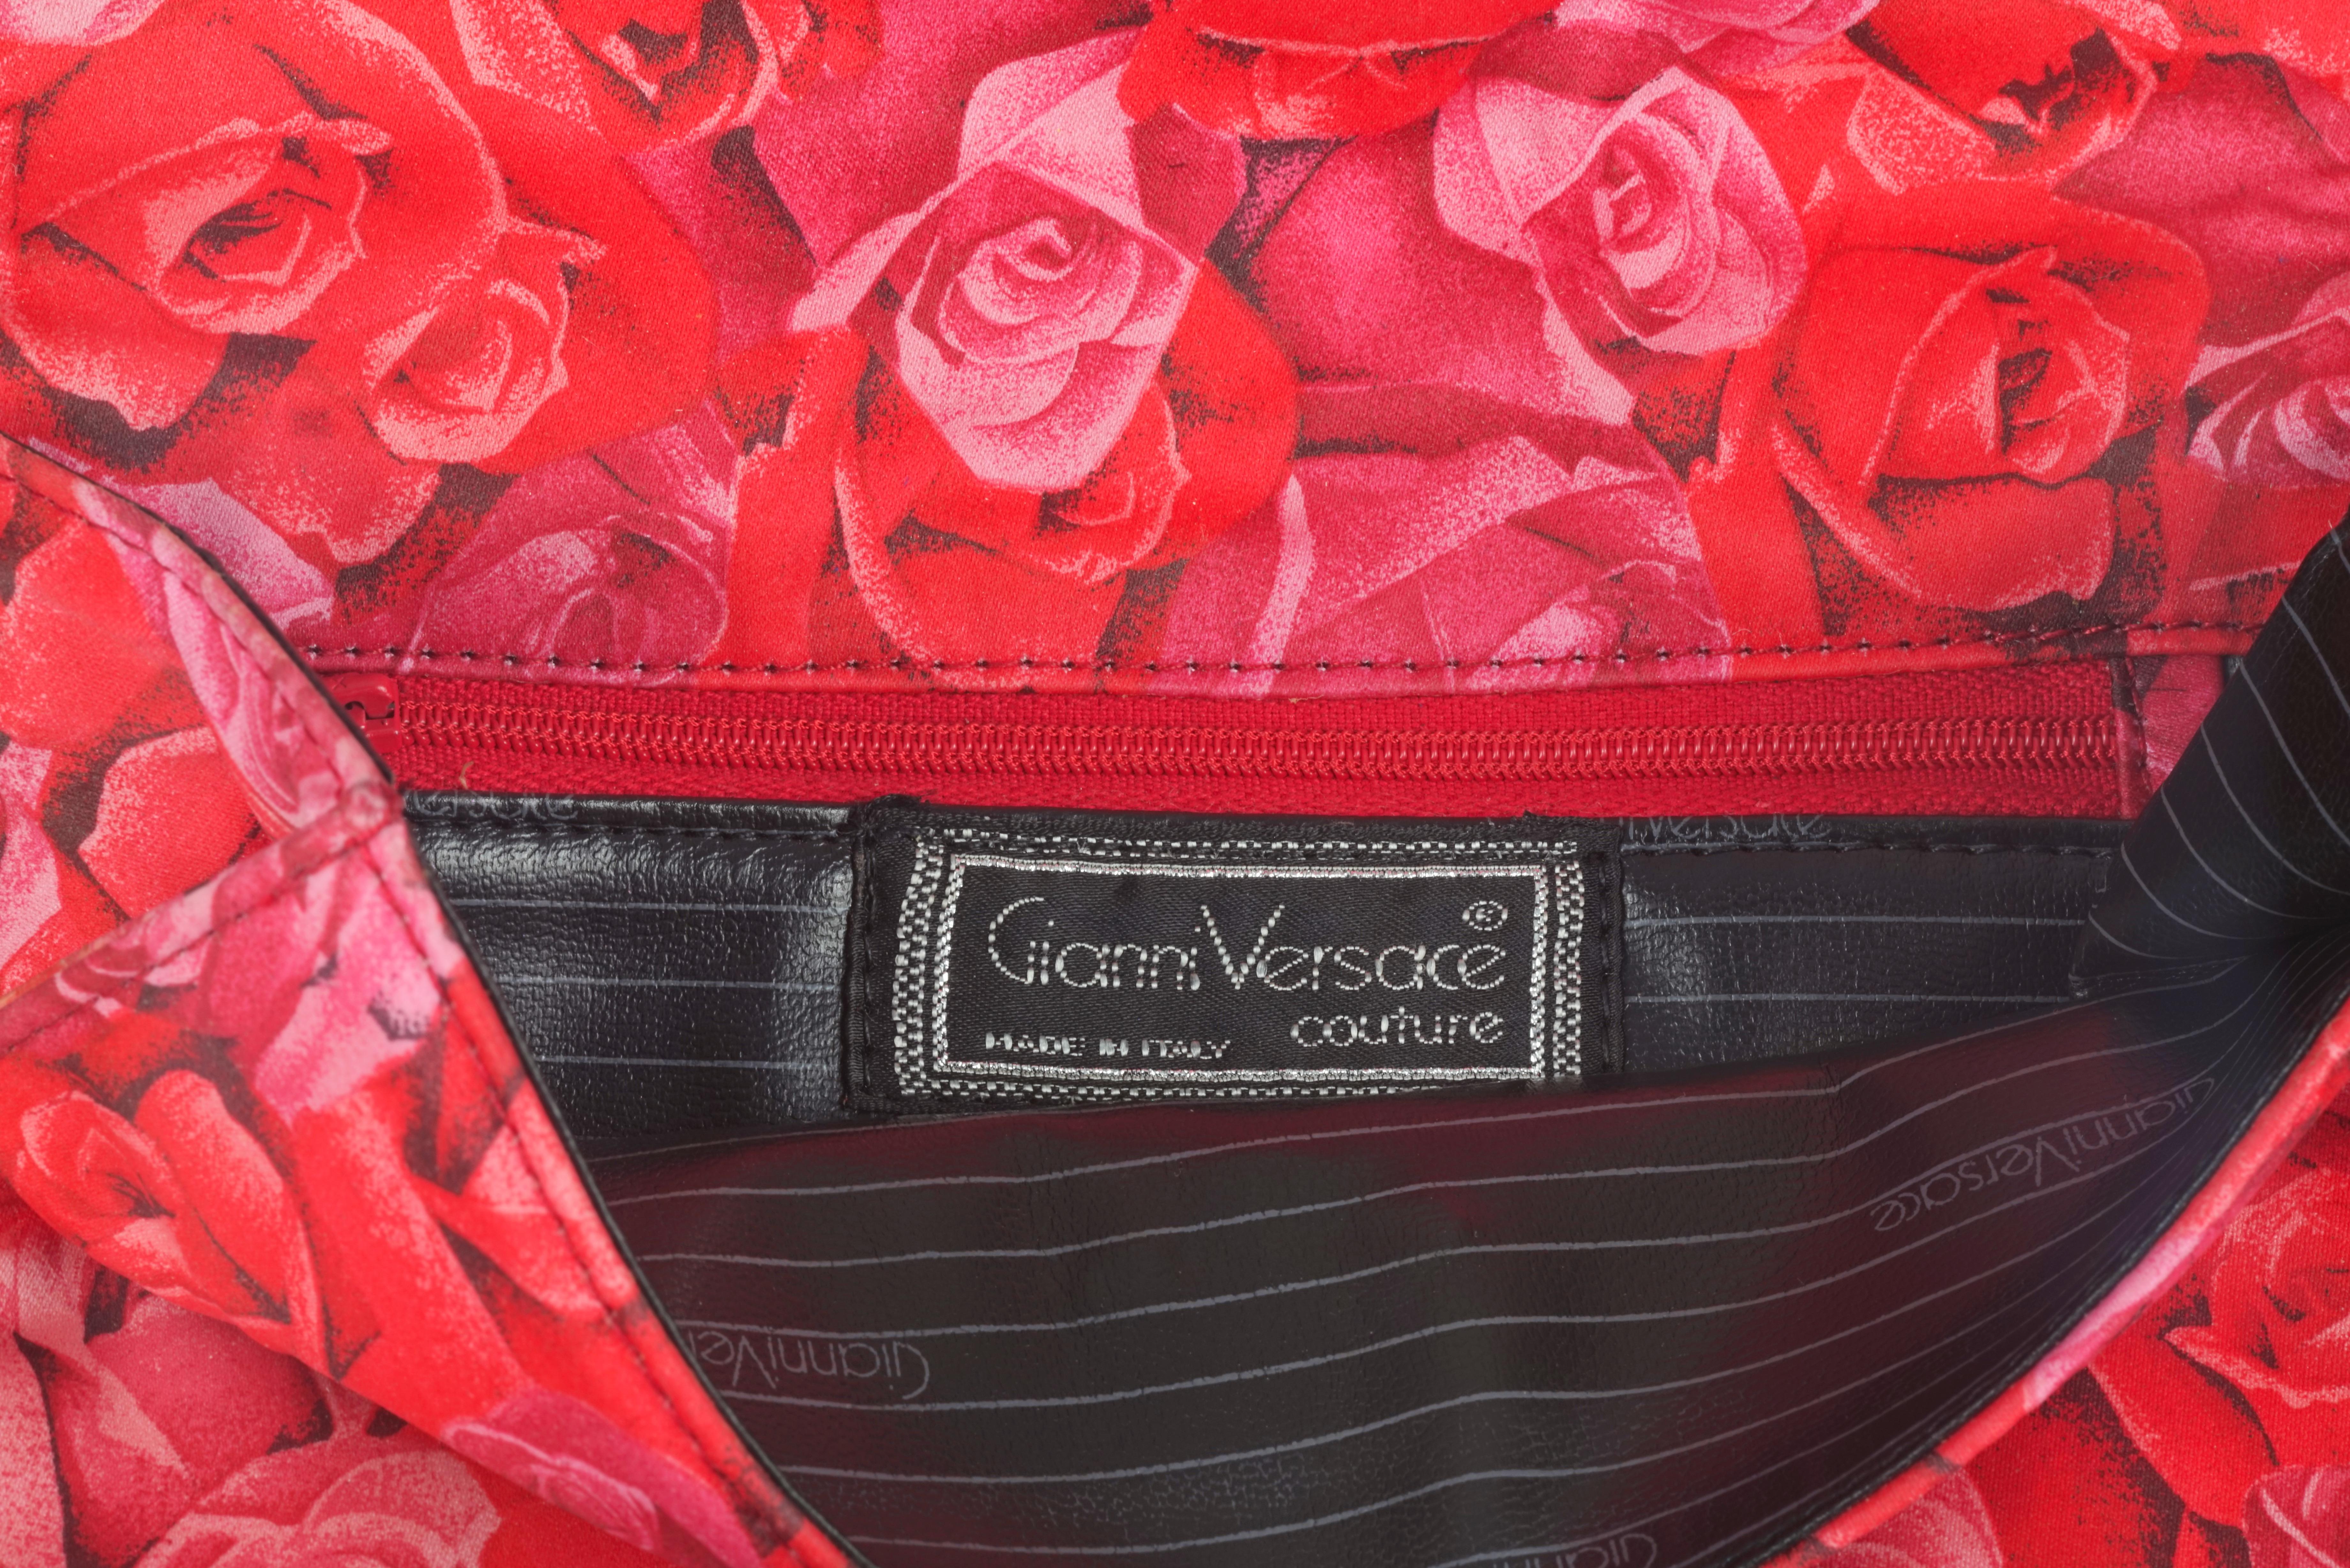 Vintage GIANNI VERSACE COUTURE Rose Print Silk Tassel Clutch Bag For Sale 4